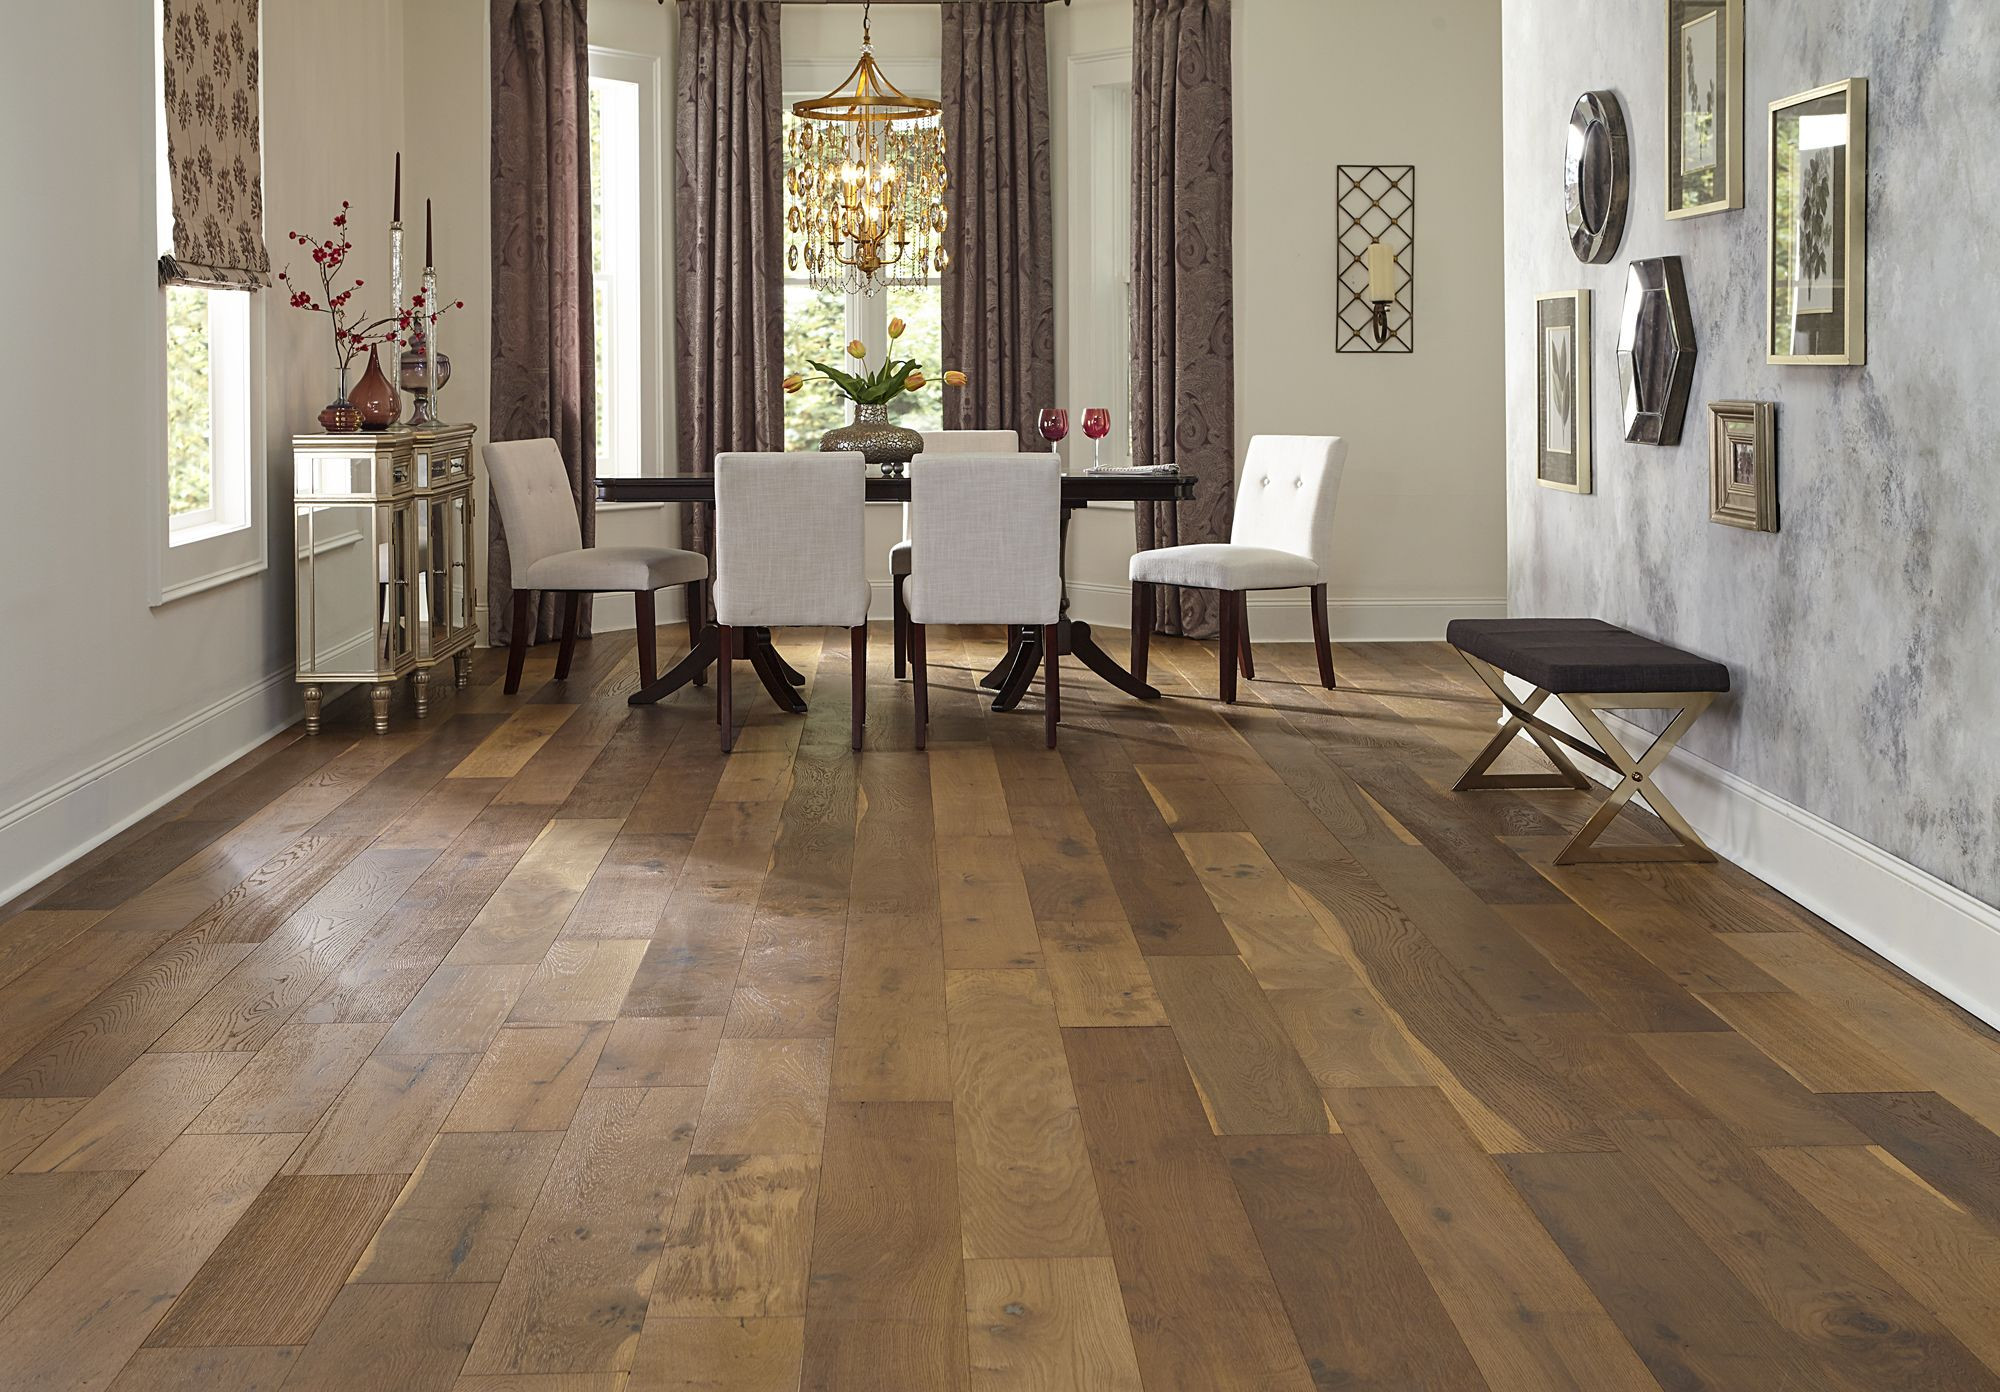 19 Spectacular are Hand Scraped Hardwood Floors A Fad 2024 free download are hand scraped hardwood floors a fad of 7 1 2 wide planks and a rustic look bellawood willow manor oak has intended for 7 1 2 wide planks and a rustic look bellawood willow manor oak has a